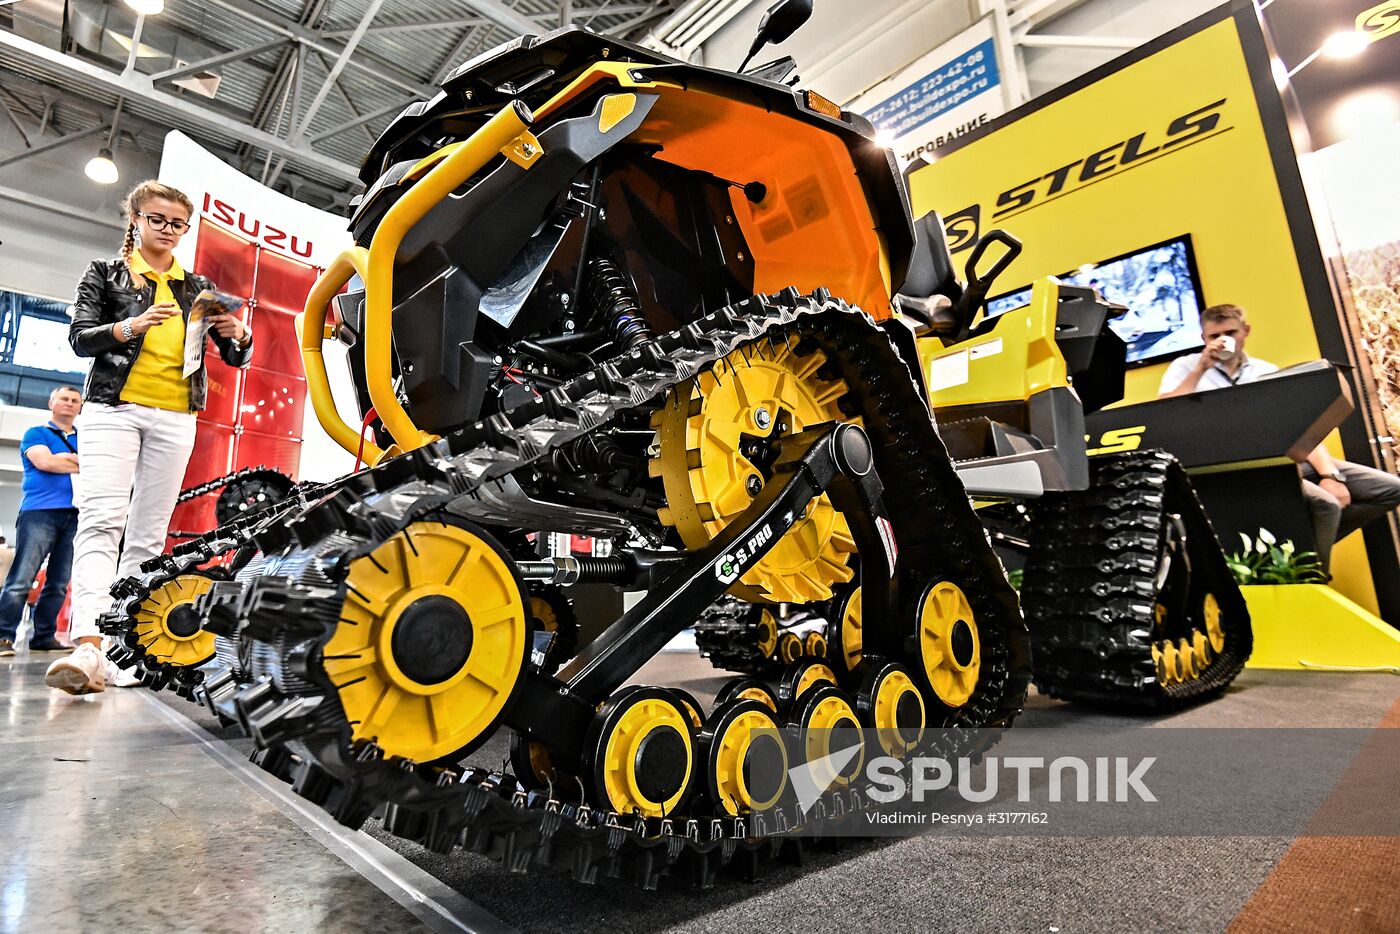 Moscow Off-road Show exhibition